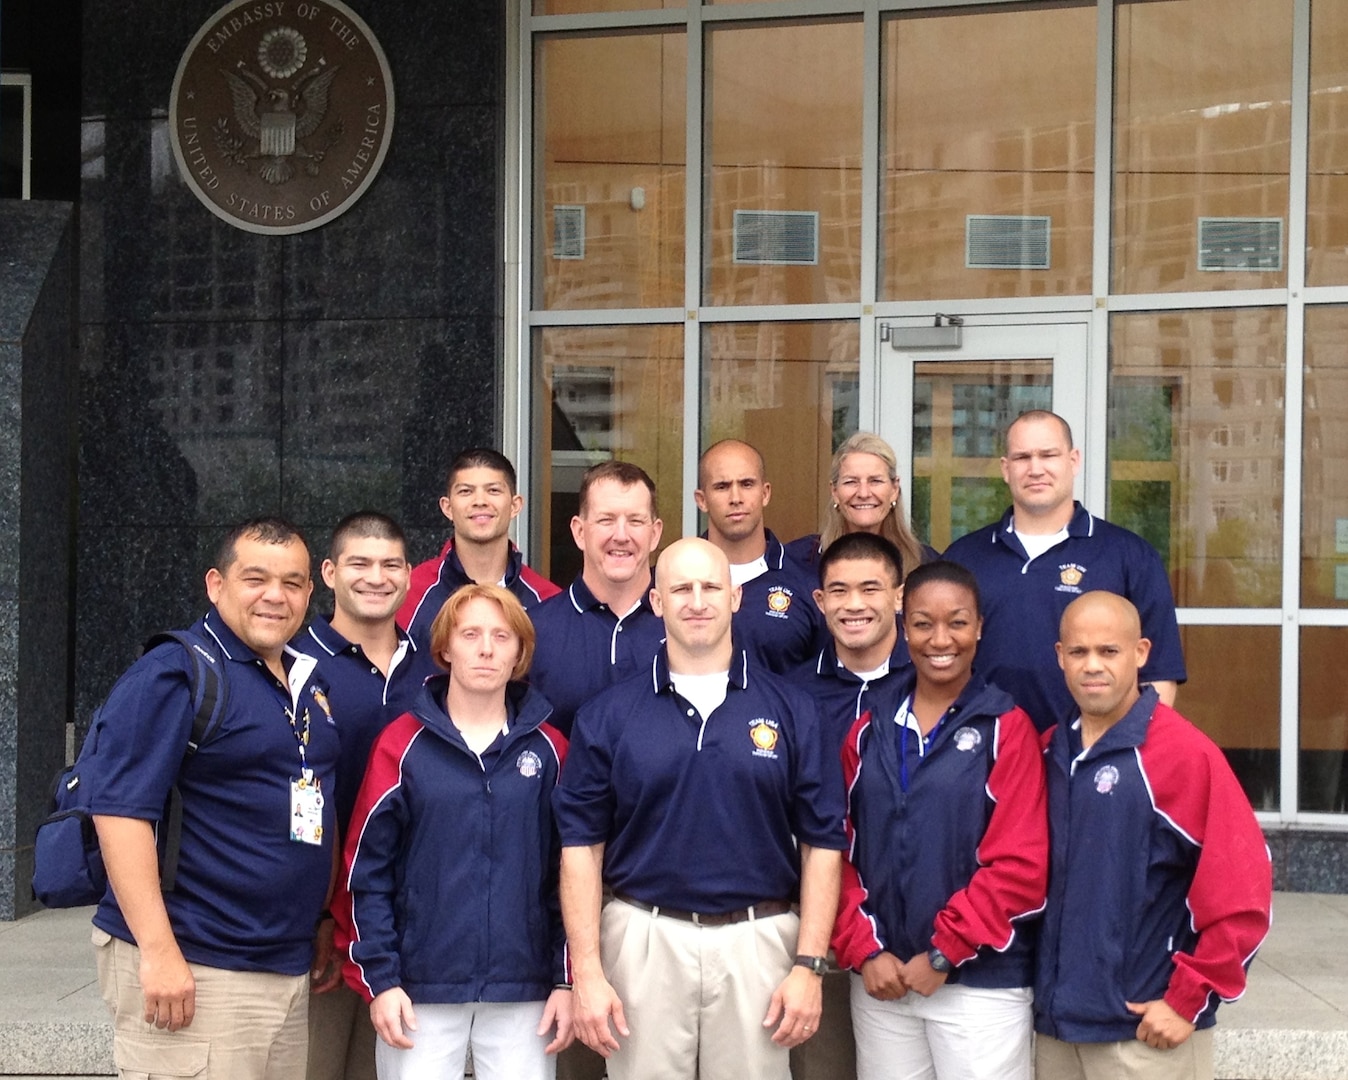 The U.S. Armed Forces Judo Team meets with staff members and fellow Service members stationed at the U.S. Embassy in Astana, Kazakhstan